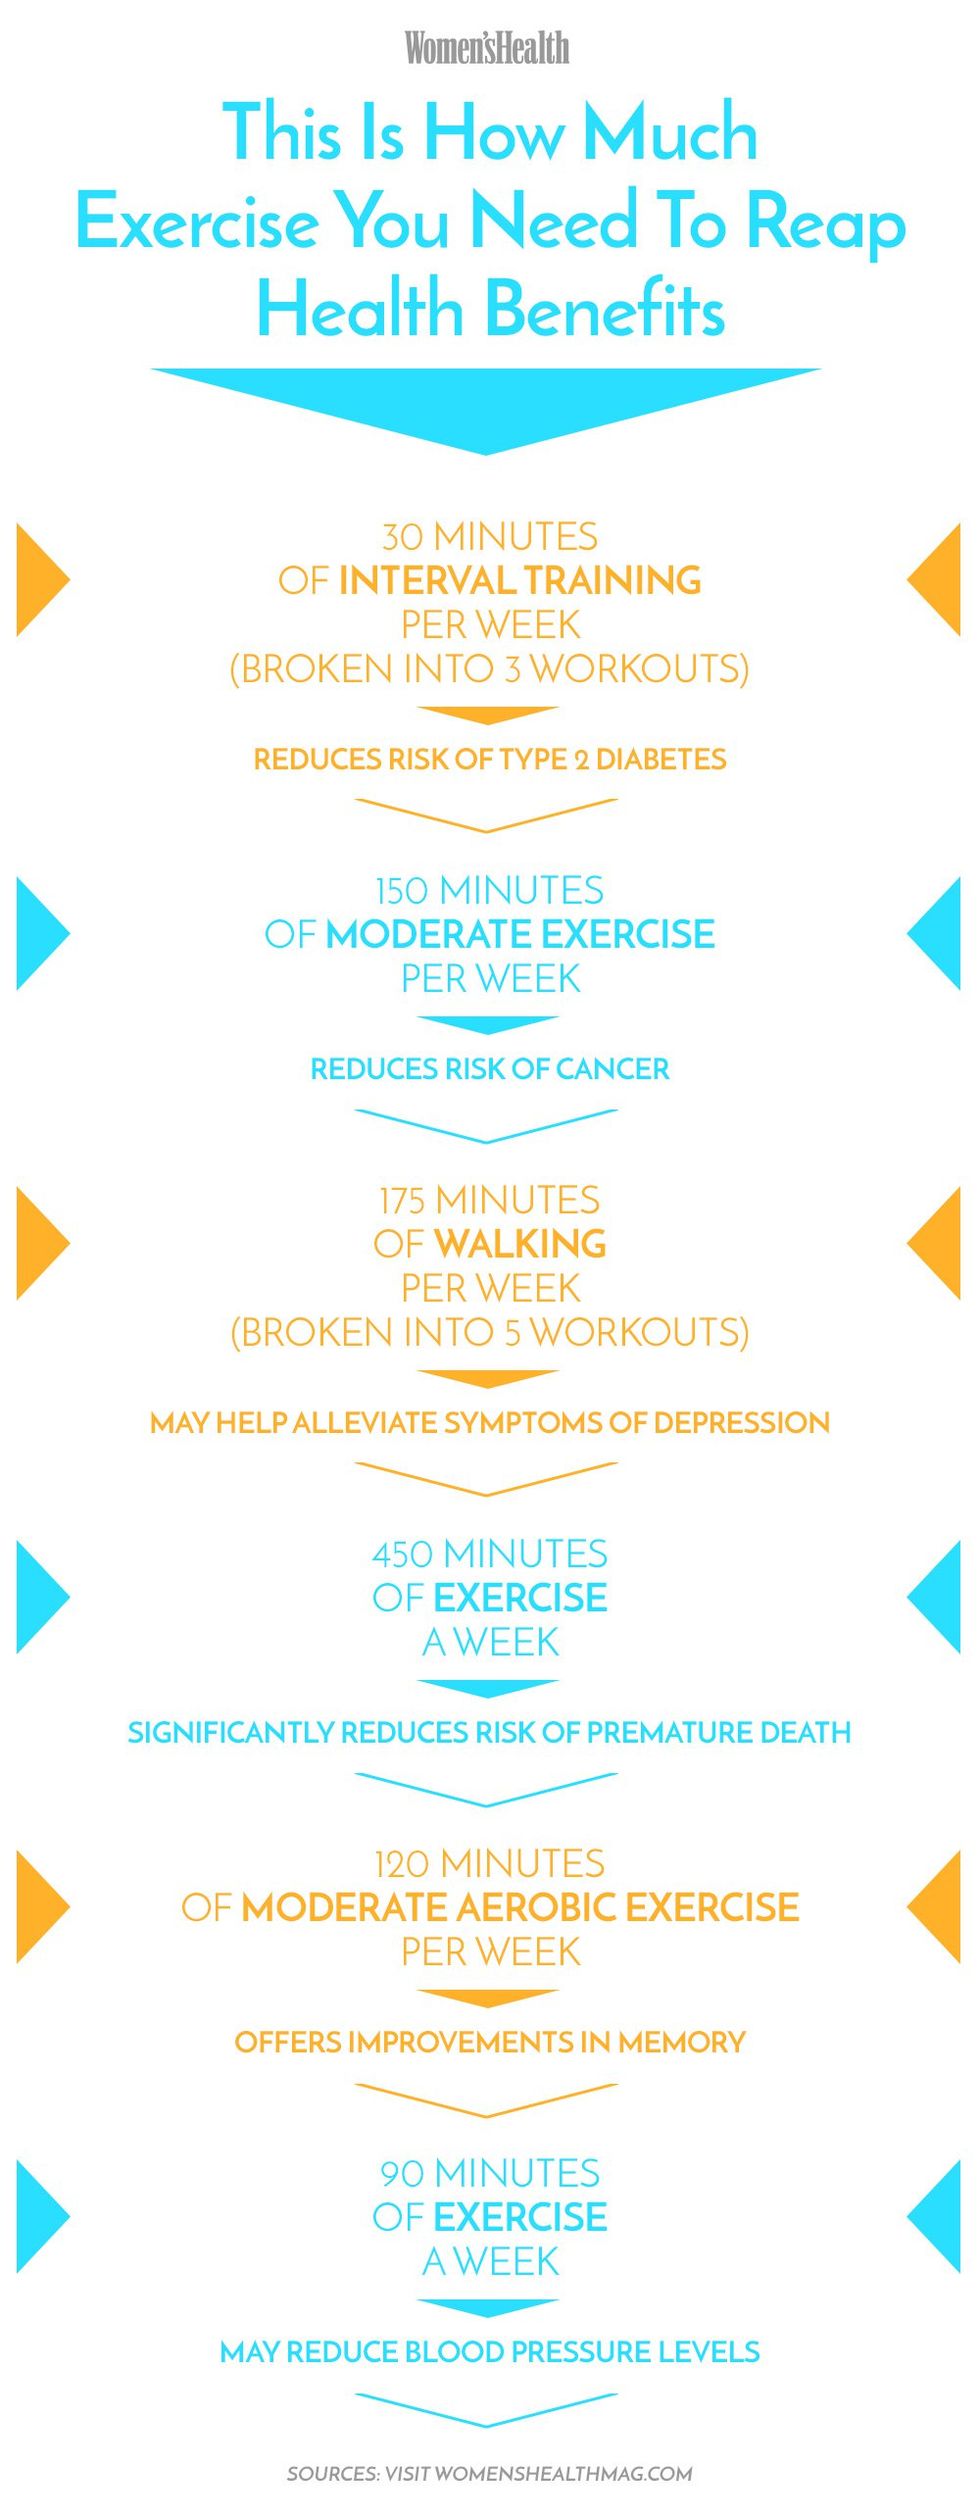 17 Health Benefits of Exercise That May Surprise You